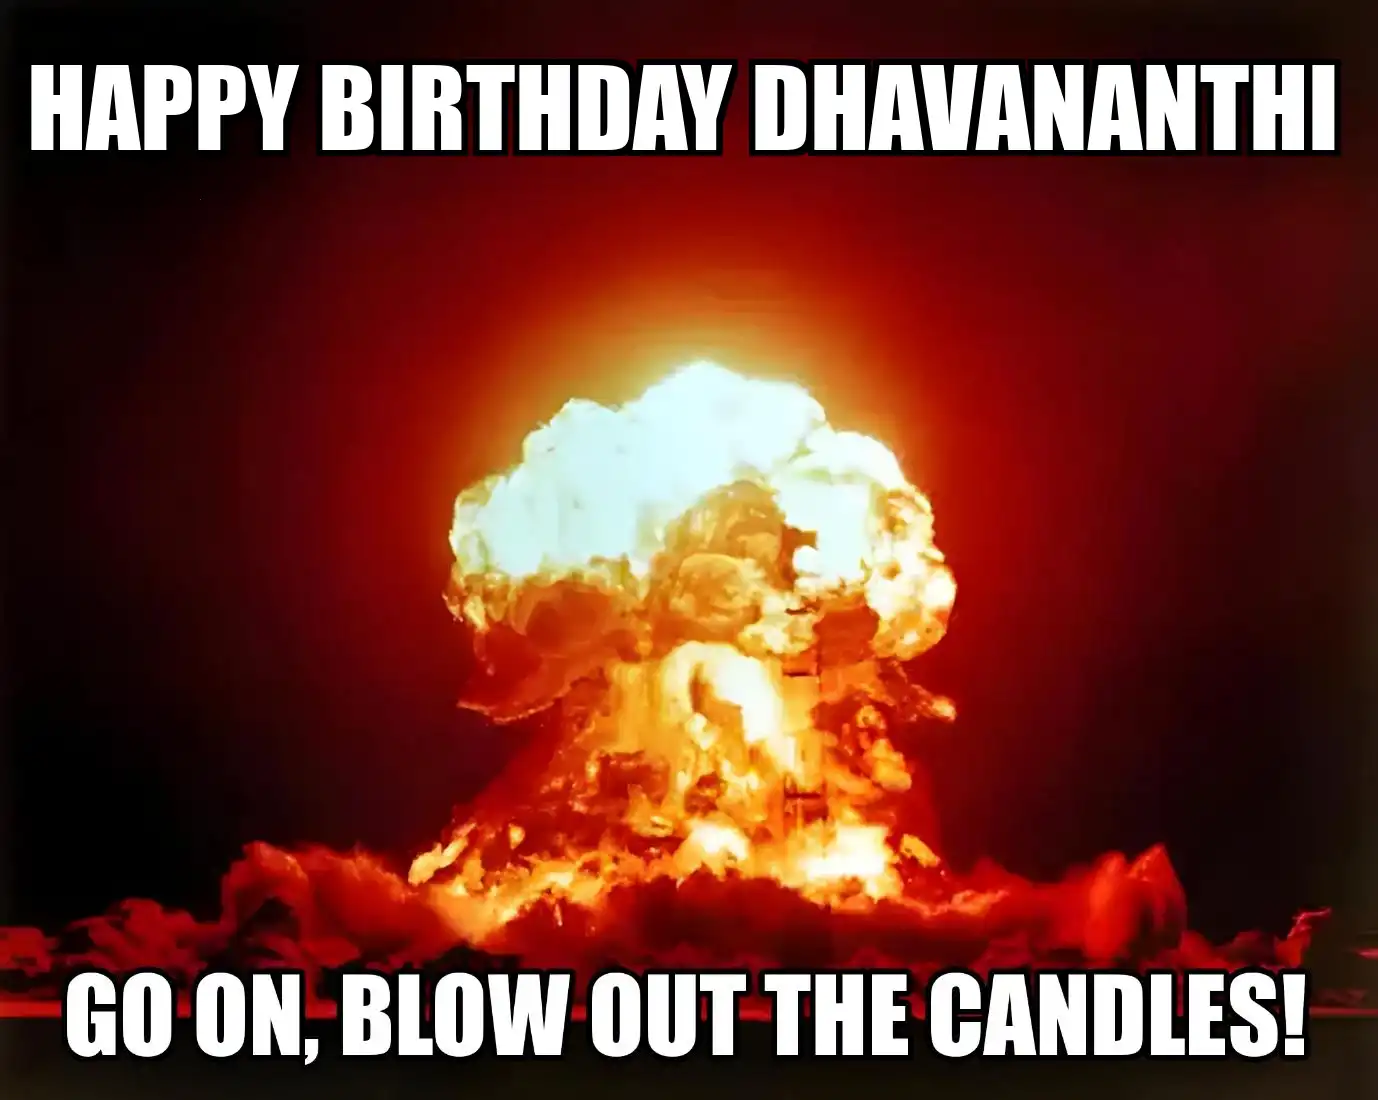 Happy Birthday Dhavananthi Go On Blow Out The Candles Meme